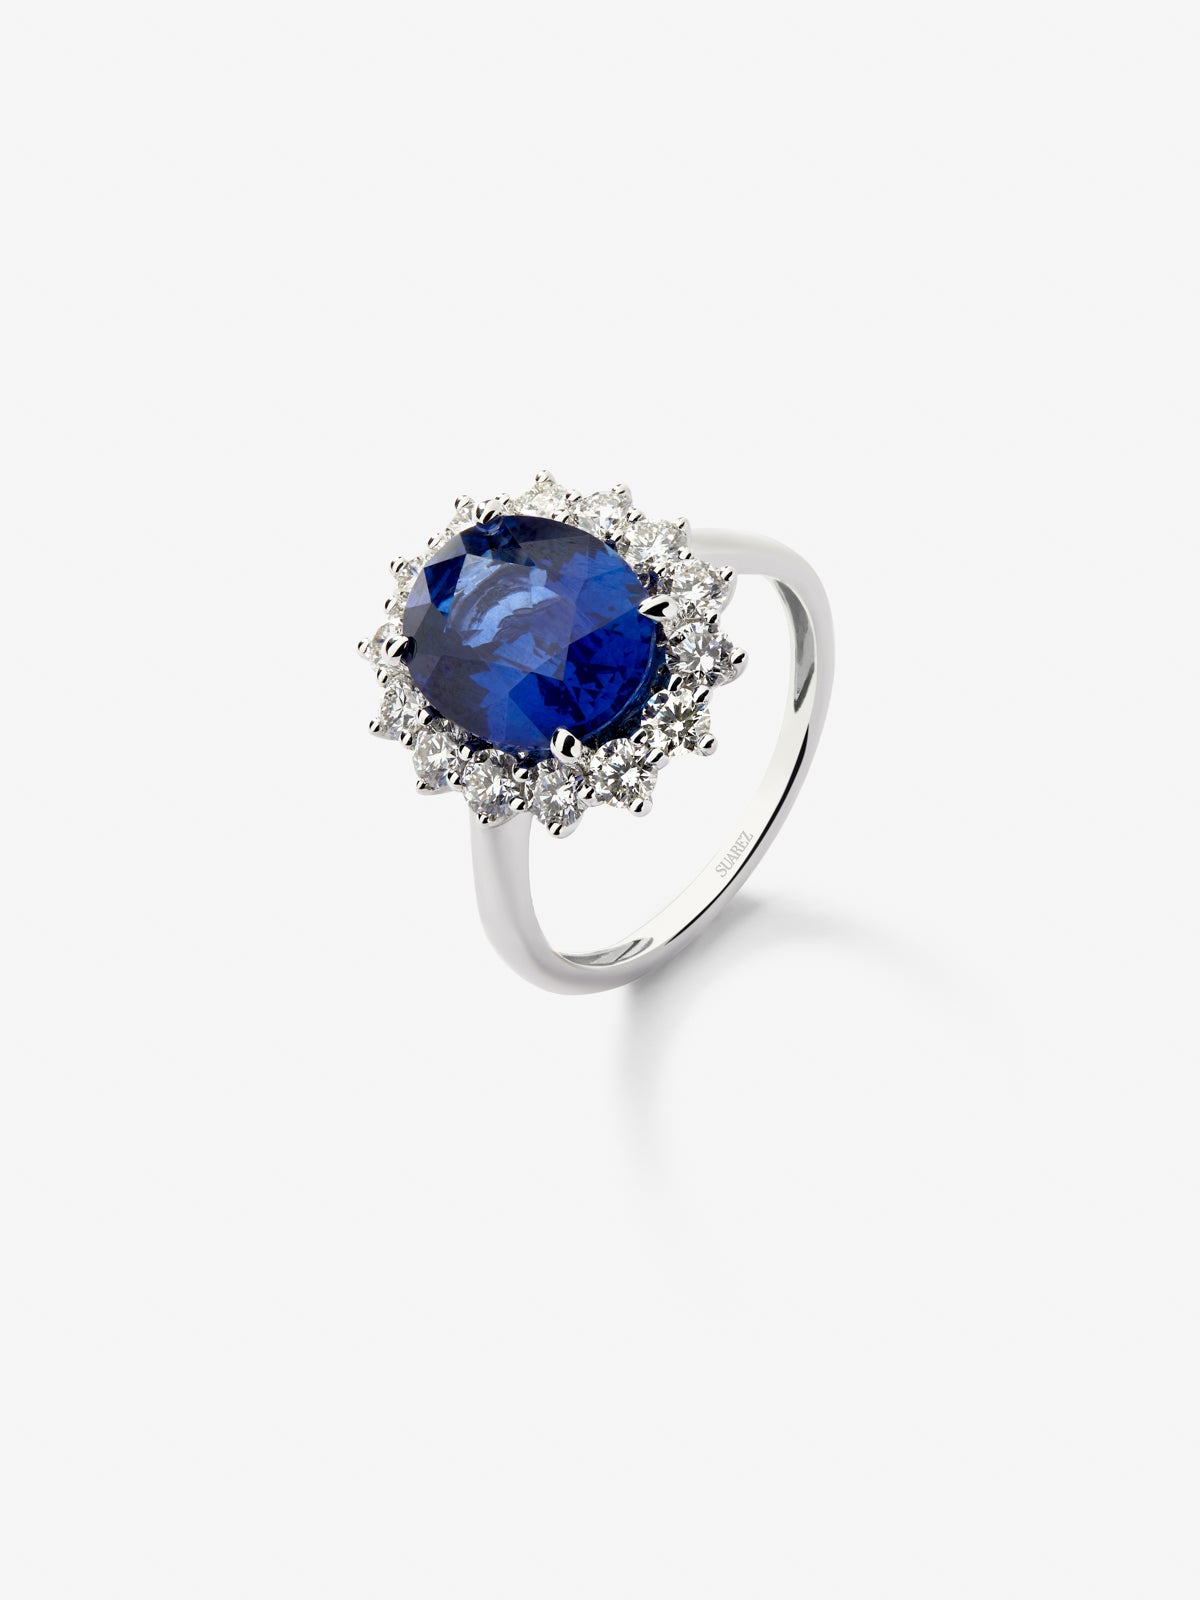 18K white gold ring with oval-cut royal blue sapphire of 4.19 cts and 14 brilliant-cut diamonds with a total of 0.73 cts